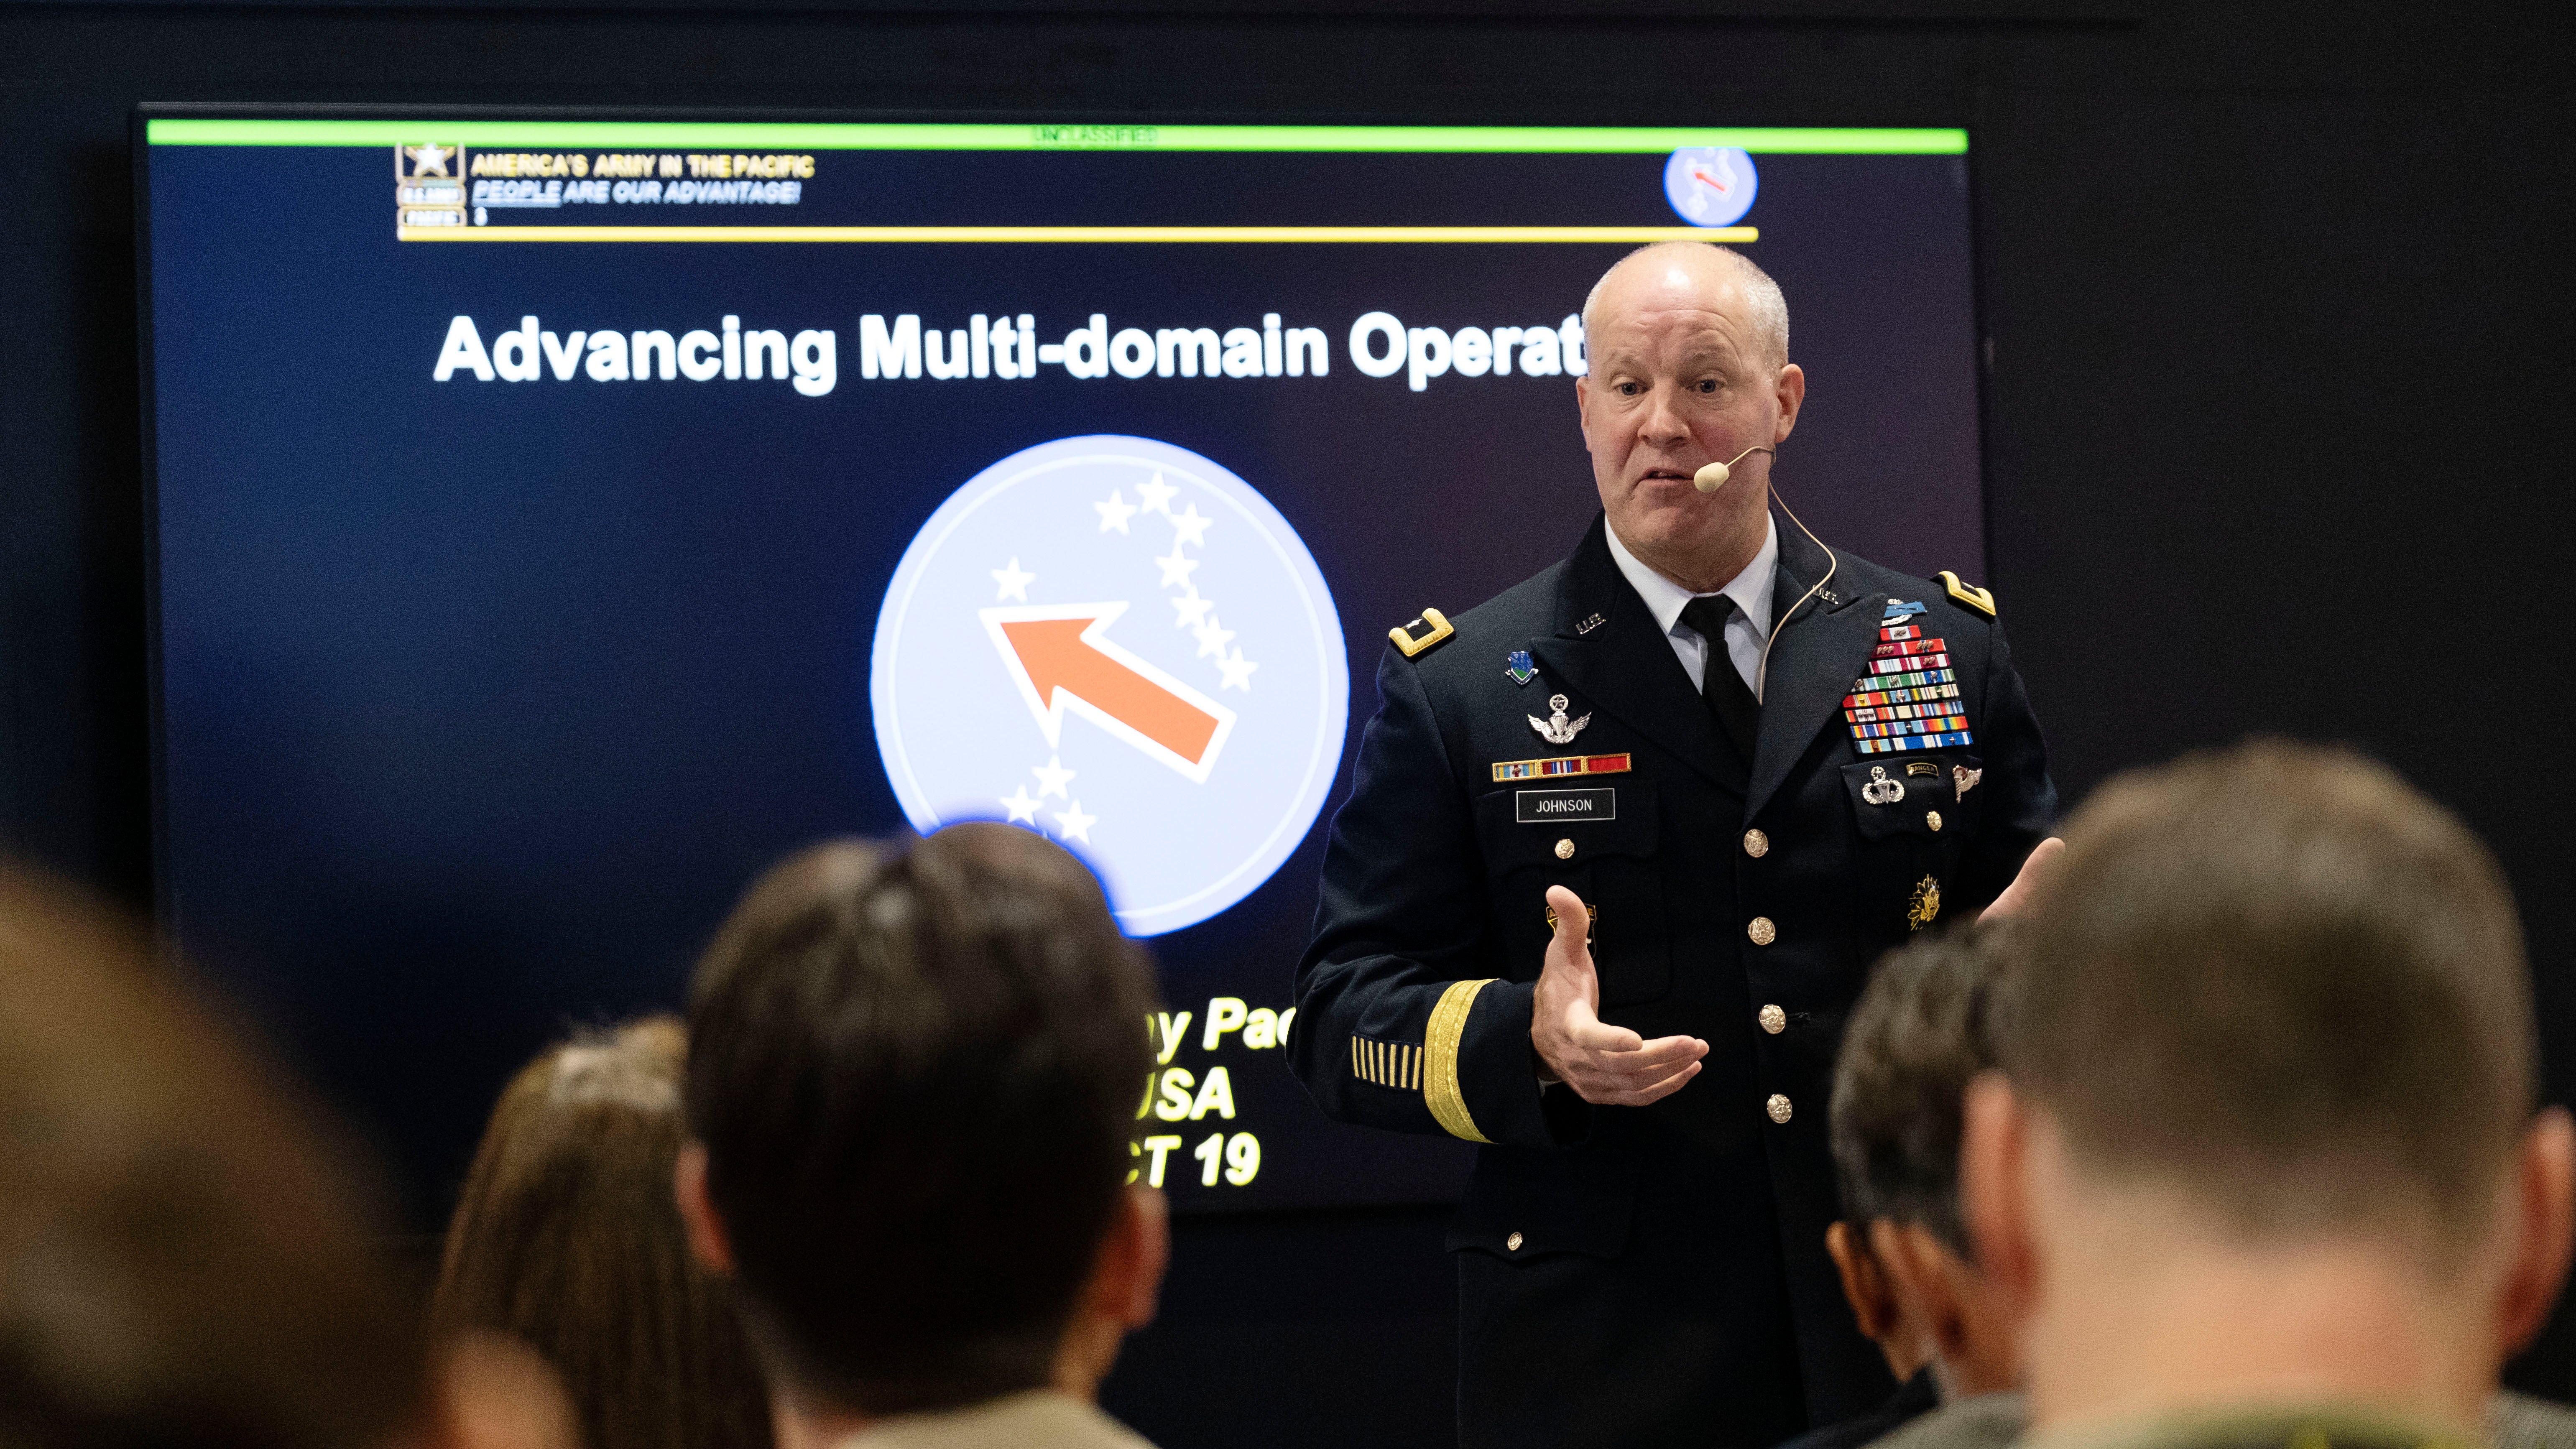 MG John Johnson addresses attendees at the Multi-Domain Operations Theory into Practice: Years of Lessons forum at the 2019 AUSA Annual Meeting and Exposition at the Washington Convention Center on Oct. 16, 2019.